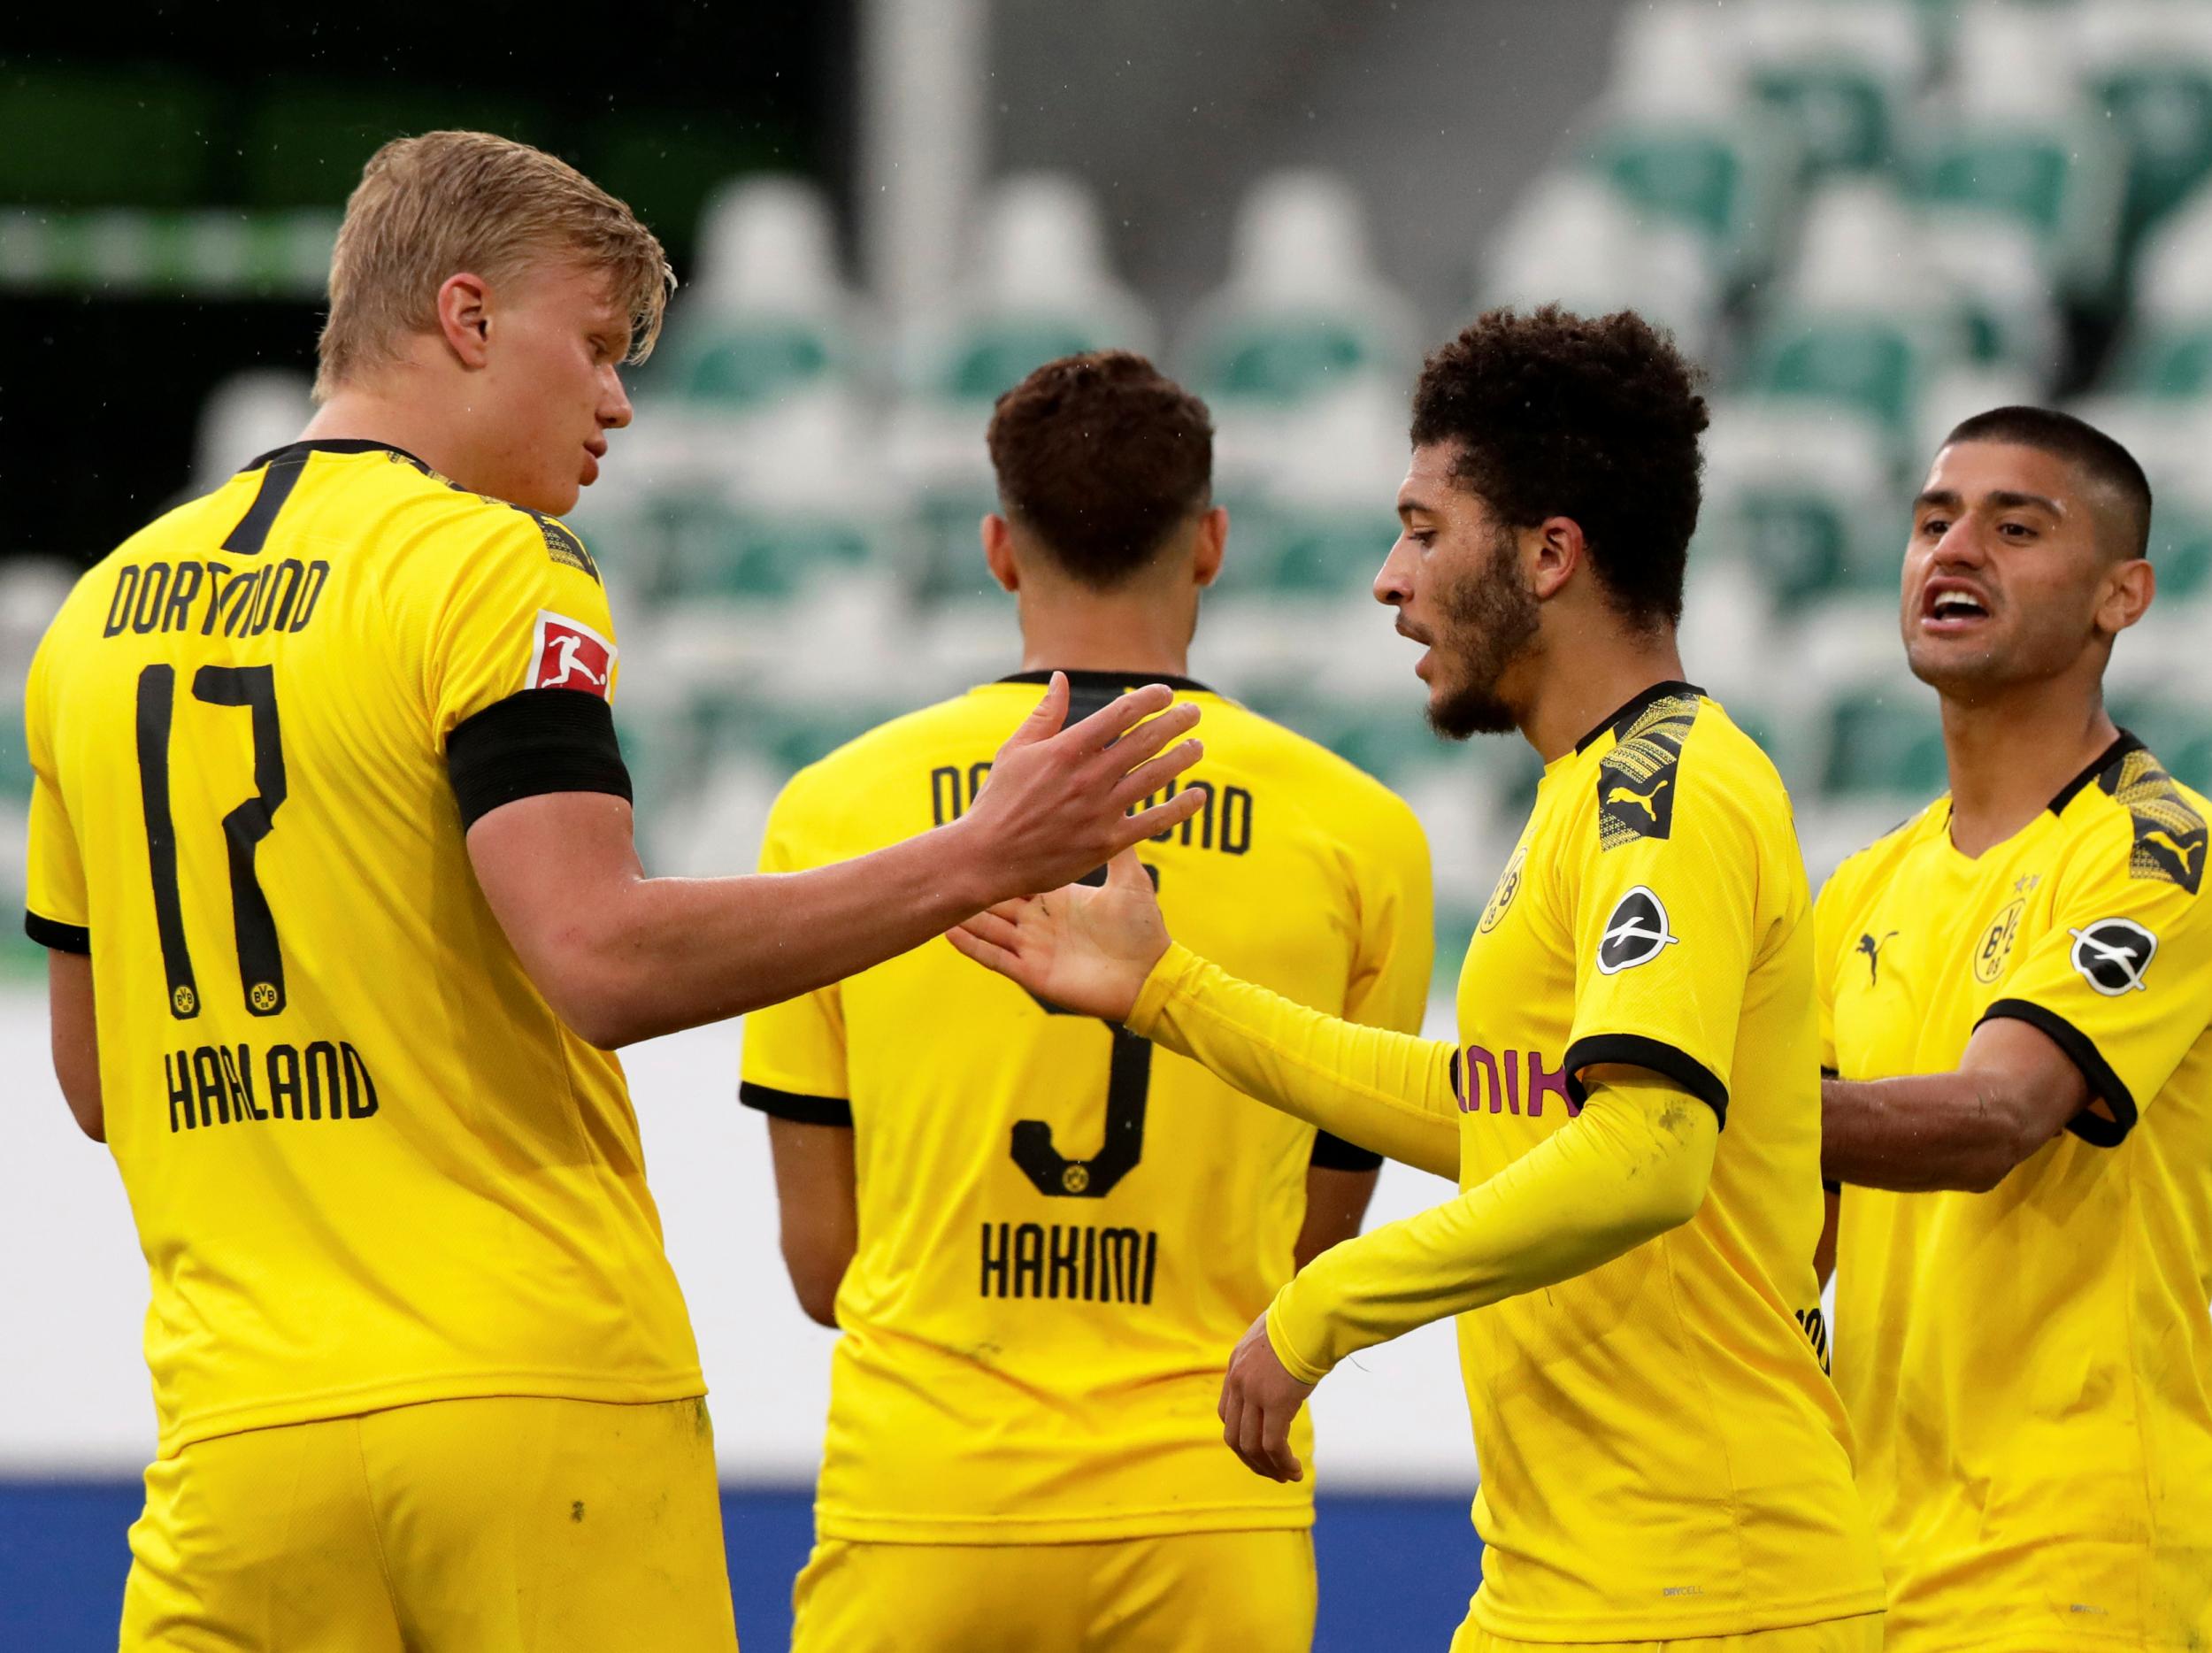 Dortmund have an exciting young team